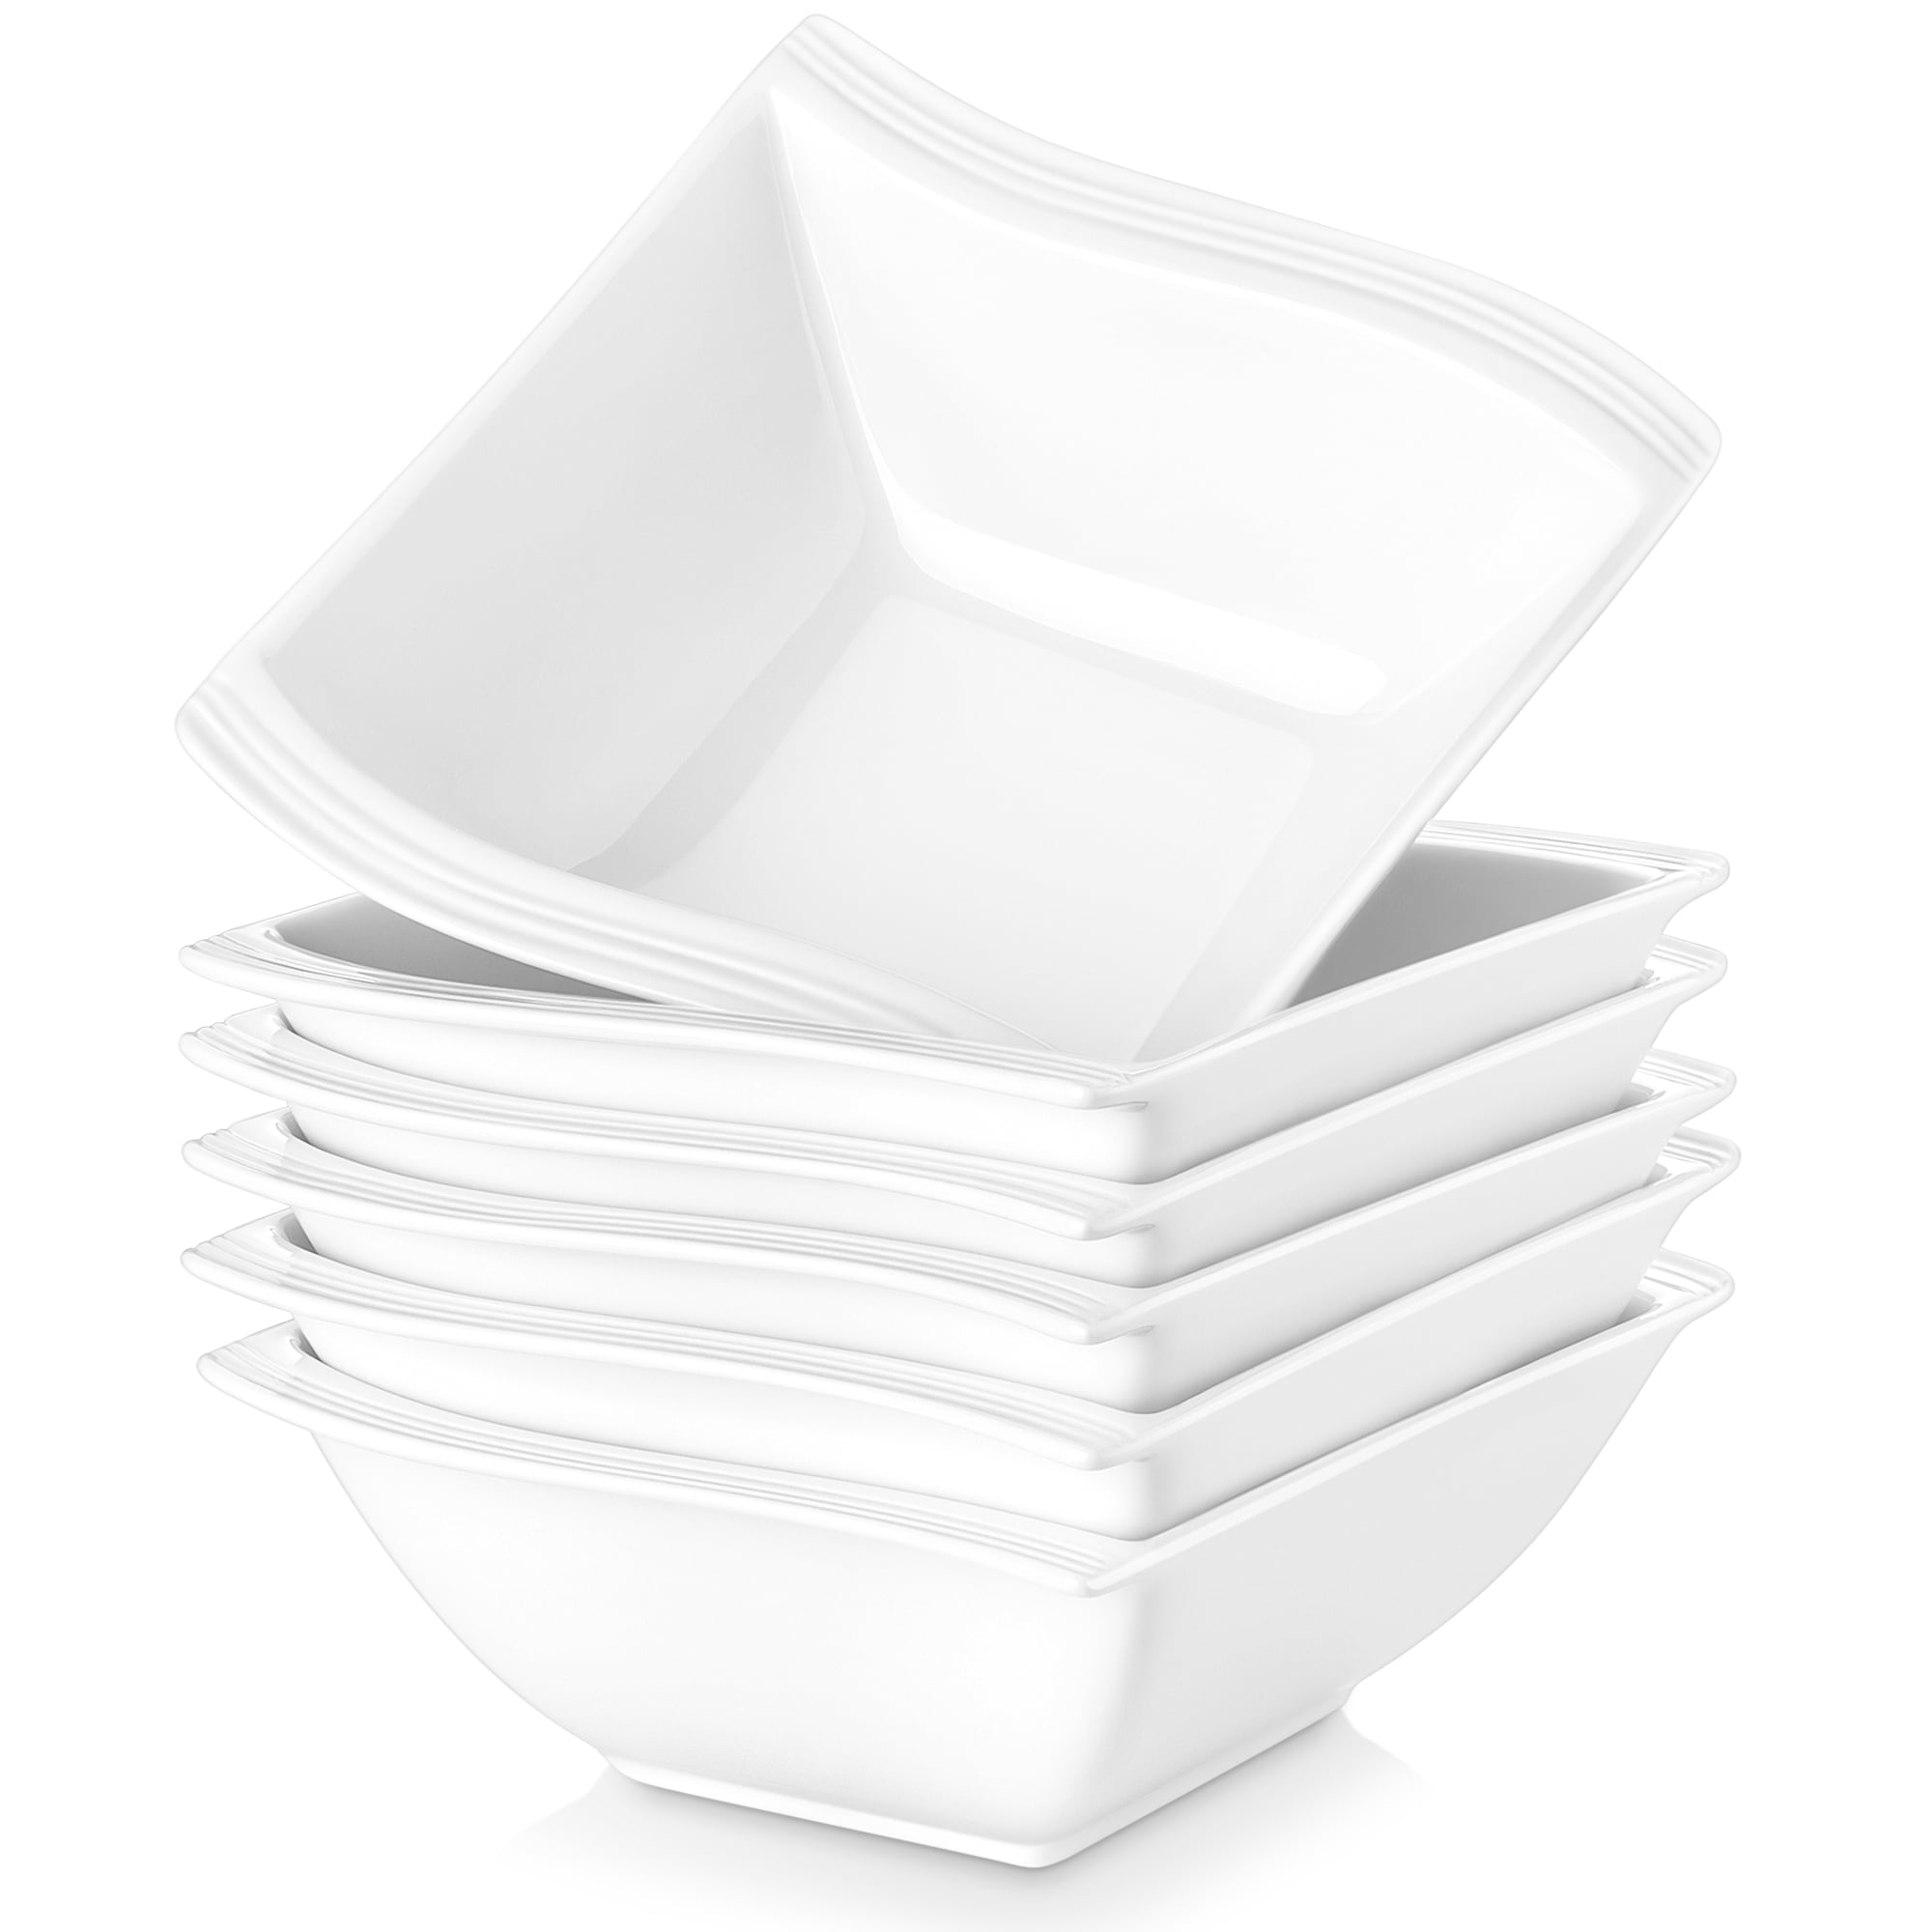 vancasso Series Cloris 6-Piece Cereal Bowls 5.5 in. Ivory White